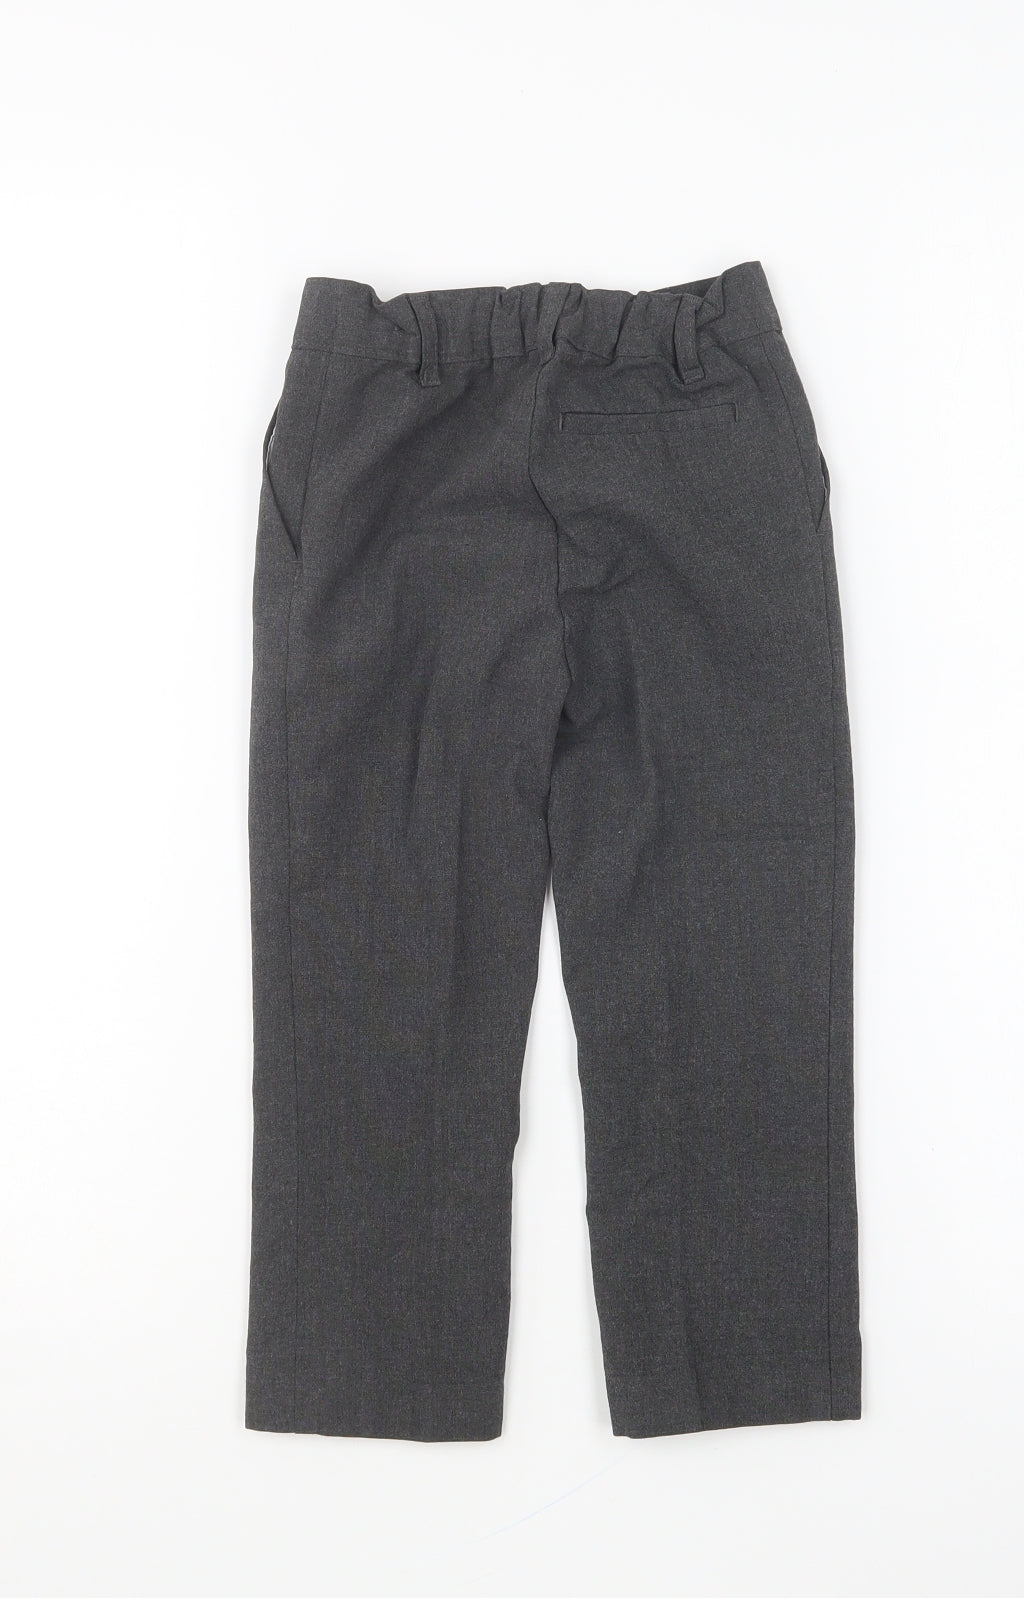 Marks and Spencer Boys Grey Polyester Capri Trousers Size 3-4 Years Regular Button - School